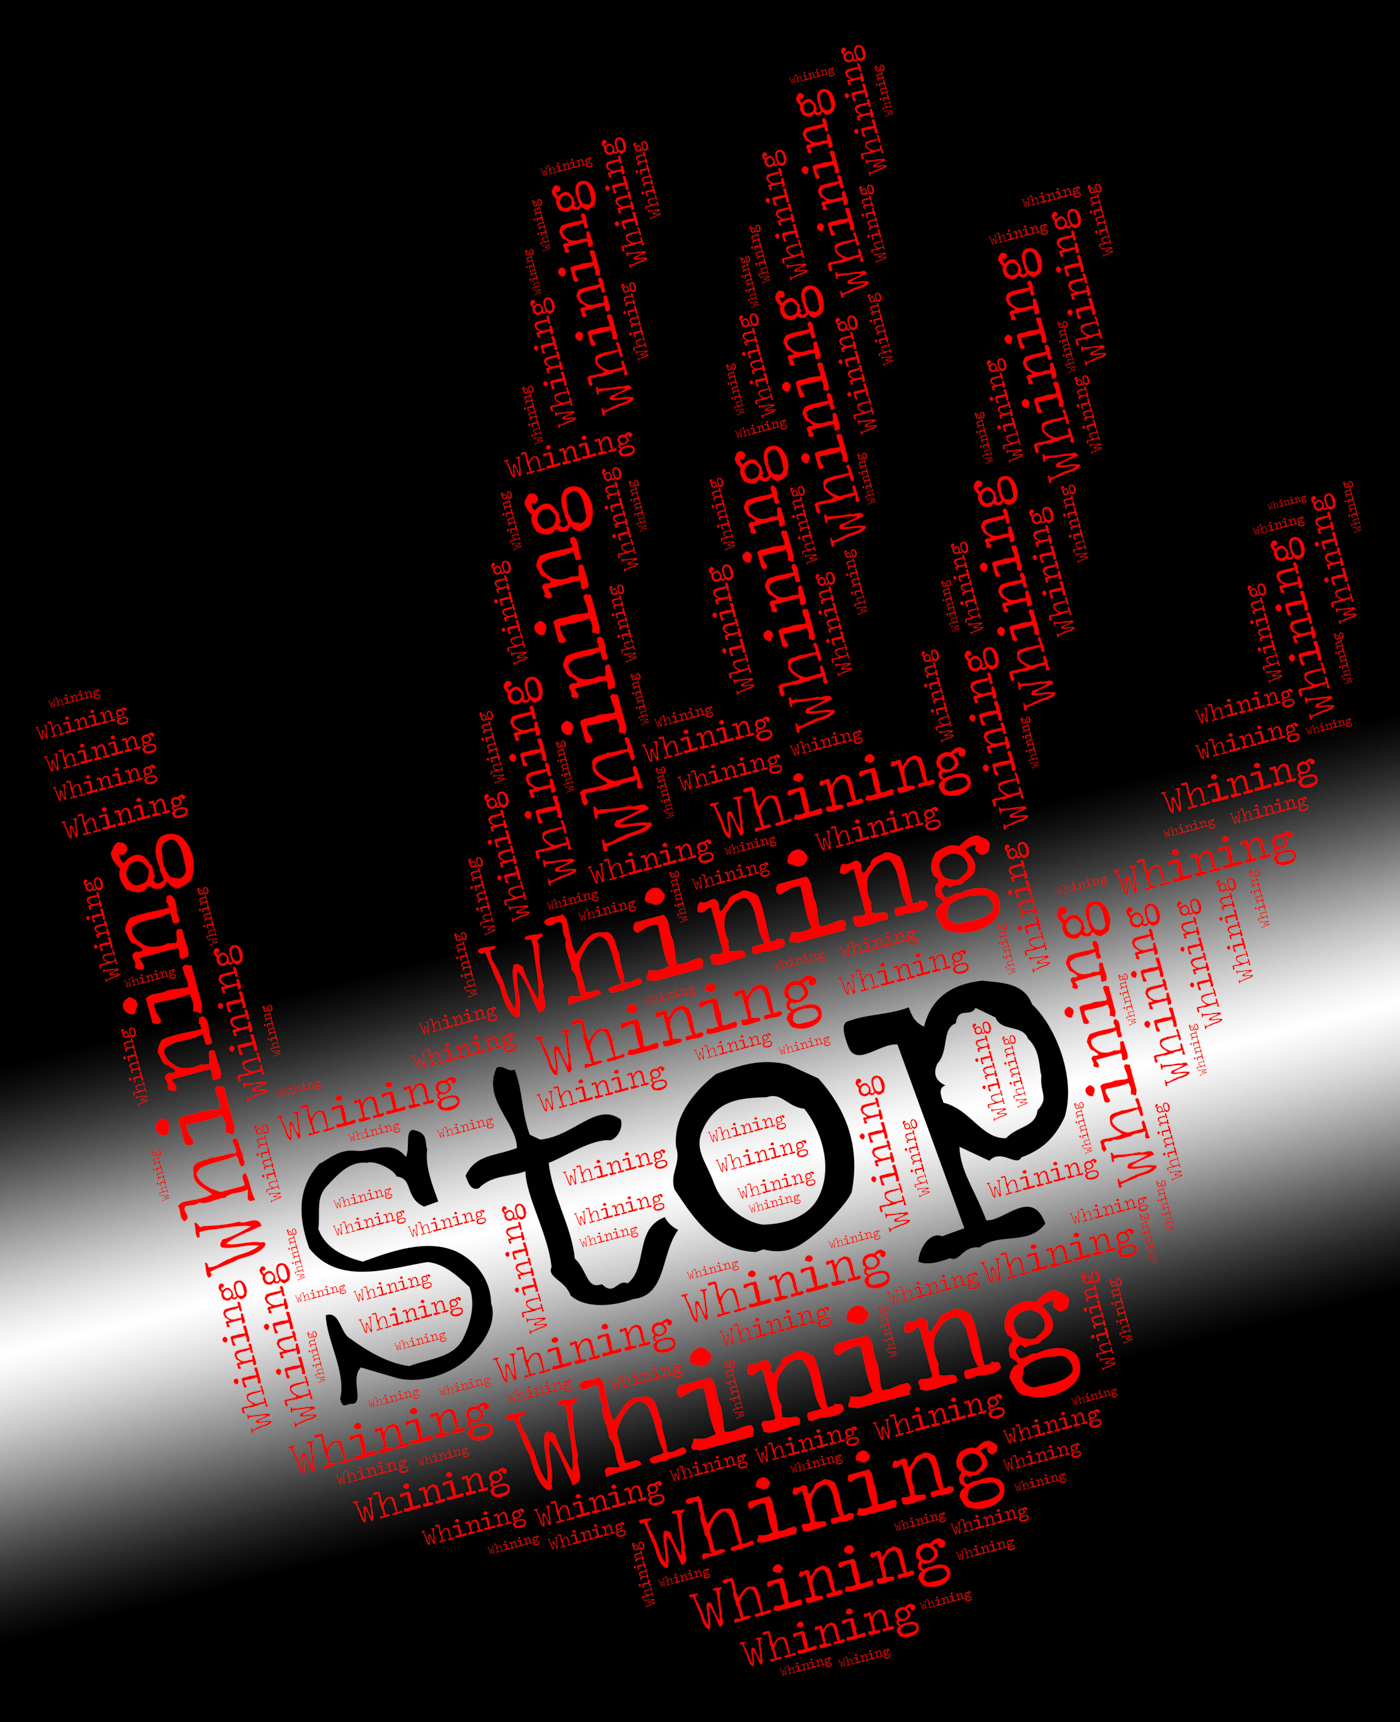 Stop whining represents warning sign and bellyache photo